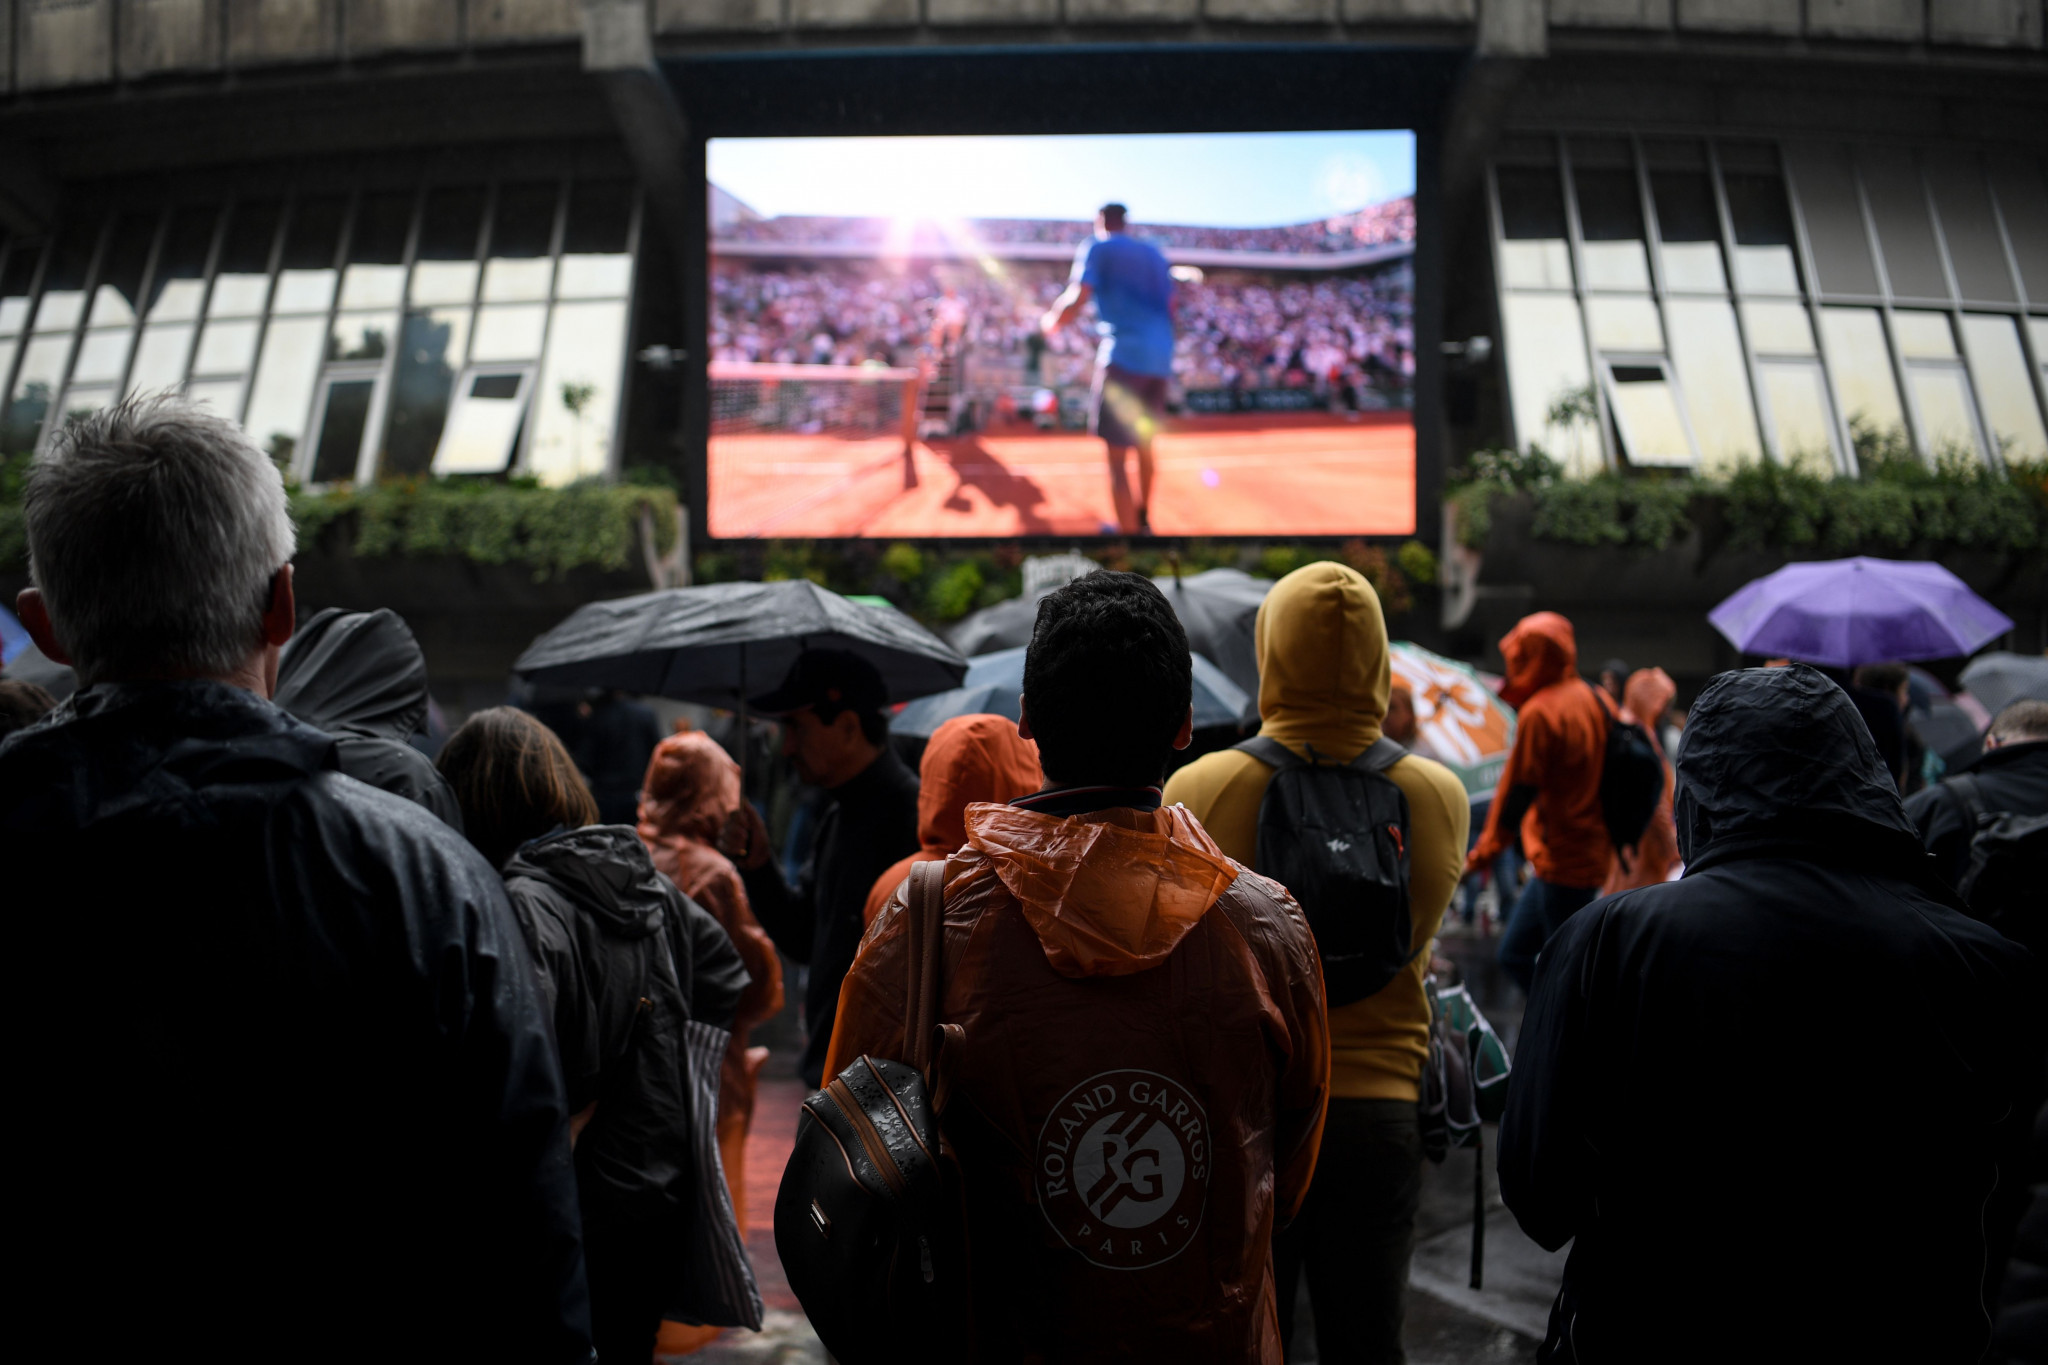 Fans had to settle for replays on the big screens as the rain poured on Roland Garros ©Getty Images